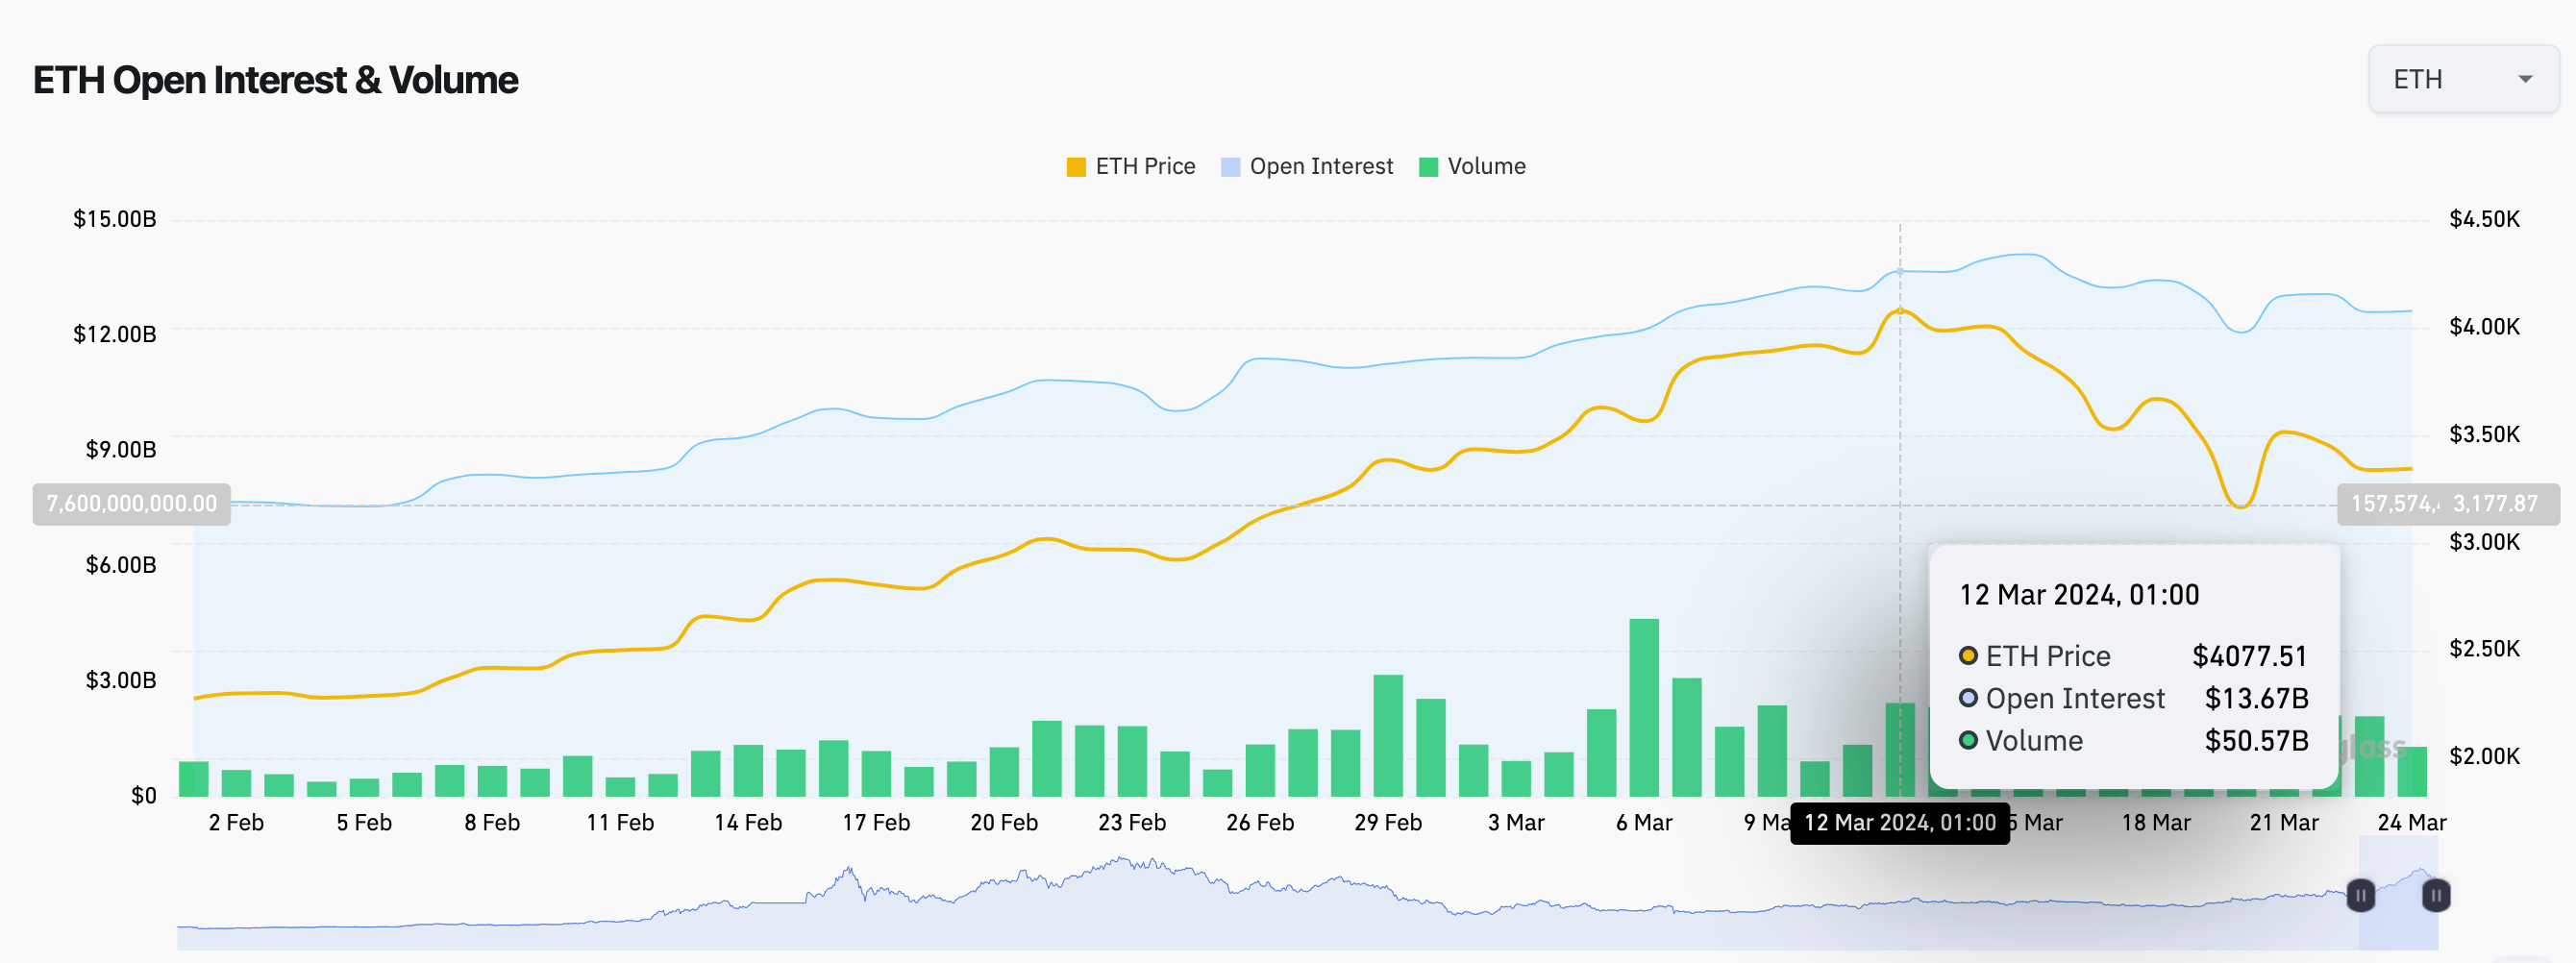 Ethereum (ETH) Open Interest, Trading Volume vs. Price action | March 2024 | Source: Coinglass